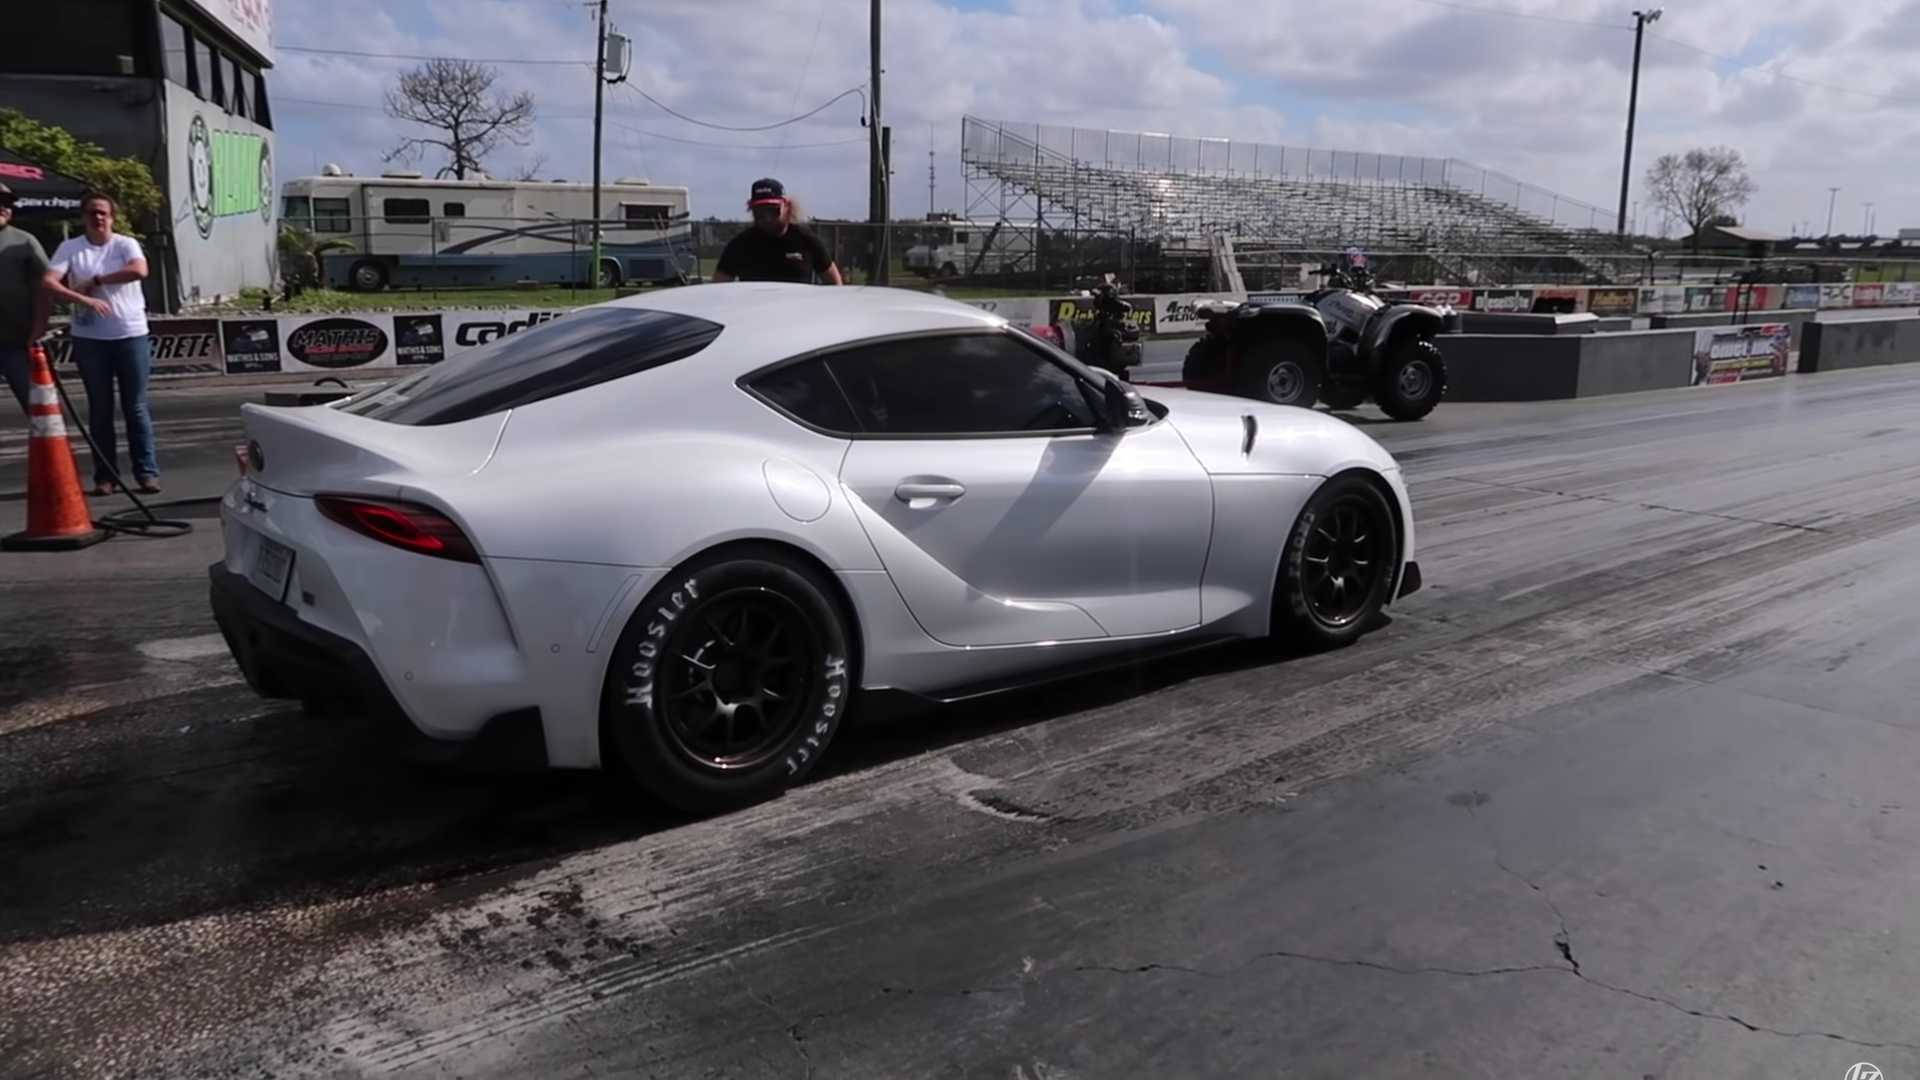 Tweaked Toyota Supra Destroys Parts In Search Of Drag Race Glory